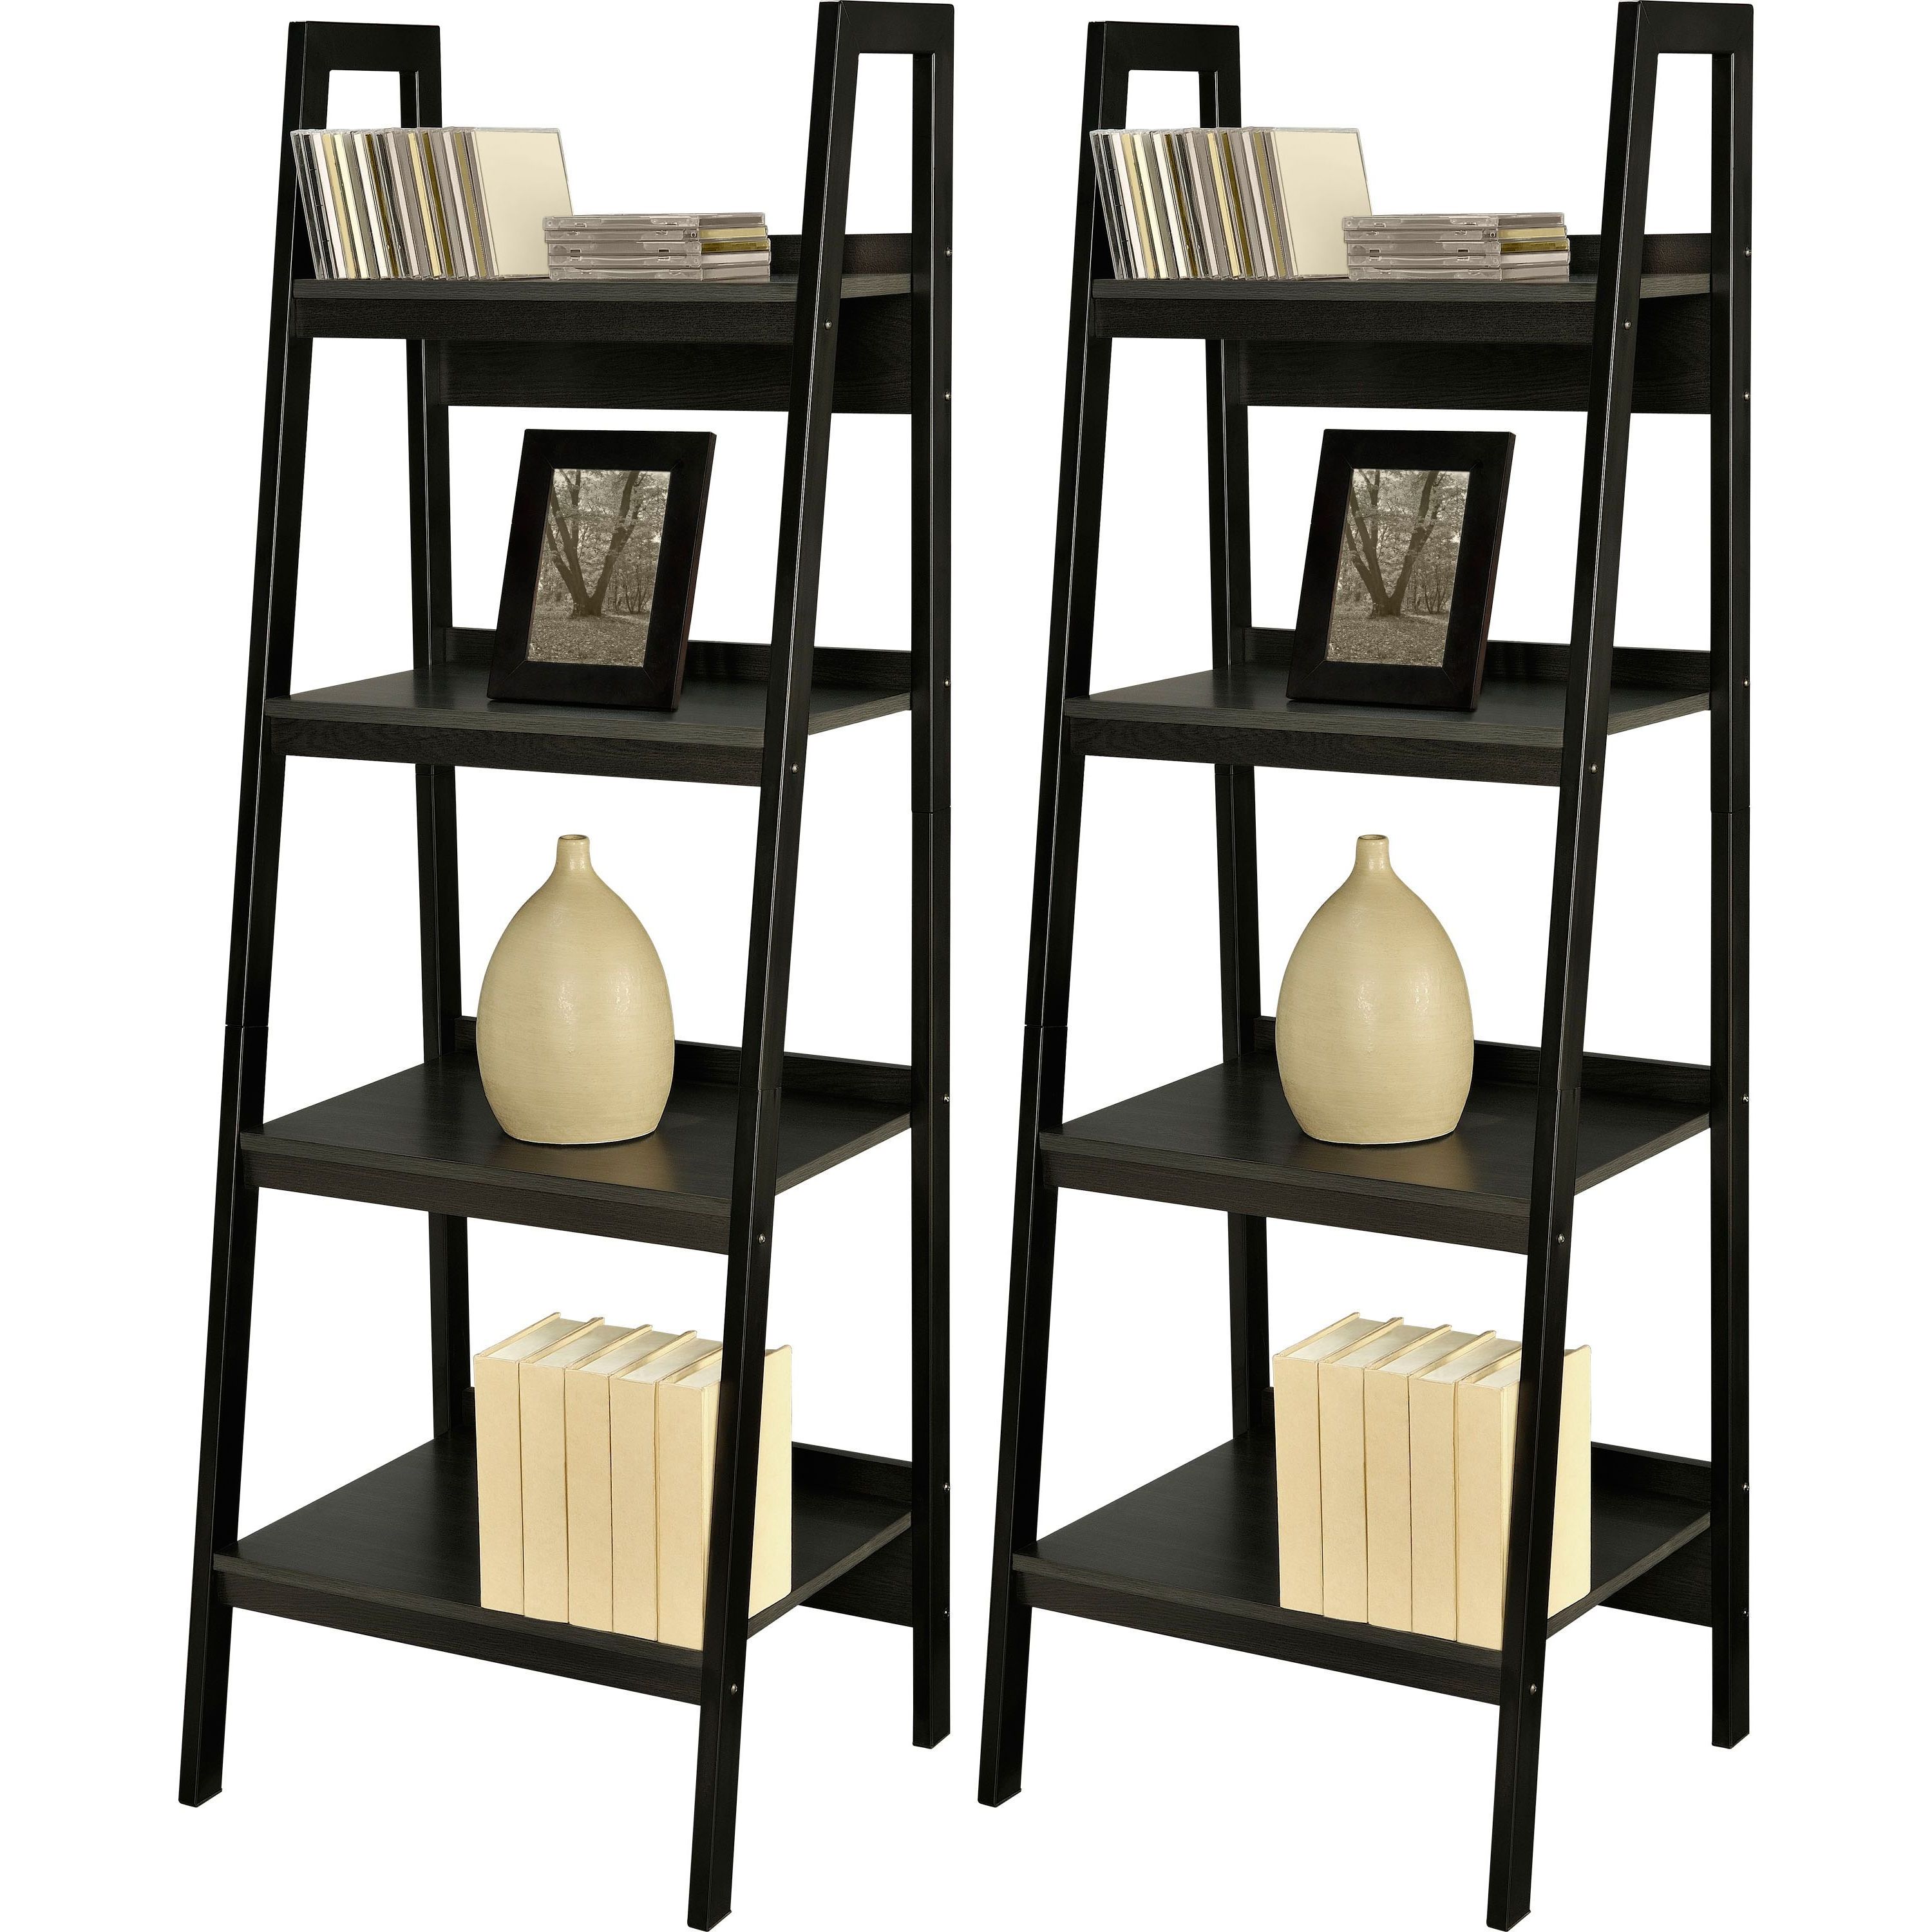 Decorate Your Office Or Living Space With These Distinctive For Popular Rupert Ladder Bookcases (View 3 of 20)